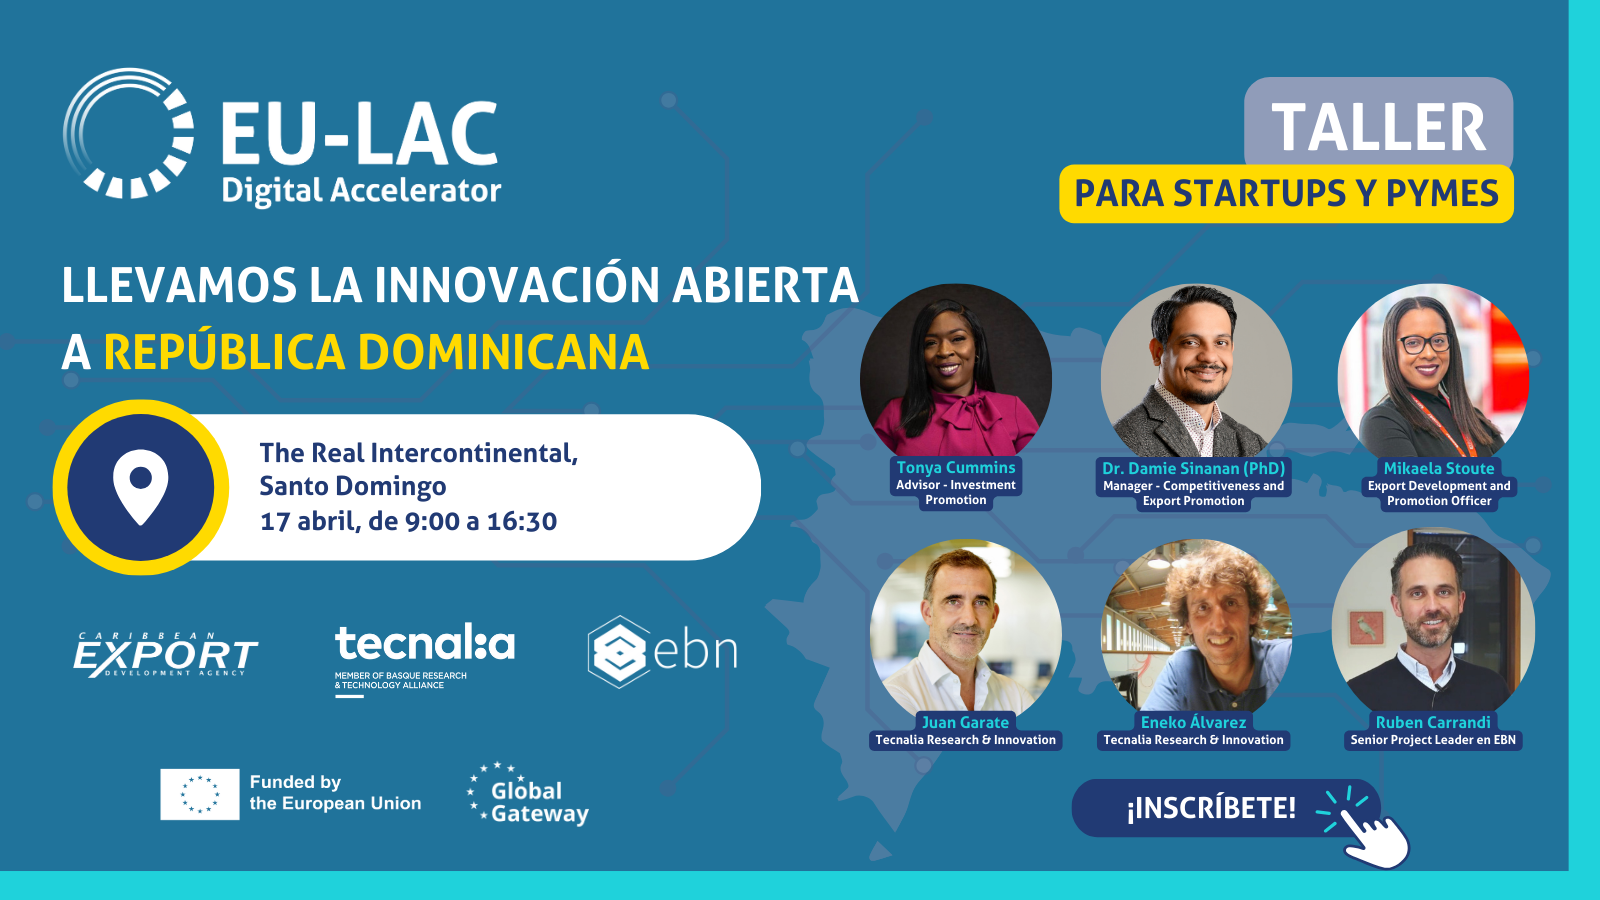 EU-LAC DIGITAL ACCELERATOR-WORKSHOP FOR STARTUPS AND SMES – DOMINICAN REPUBLIC